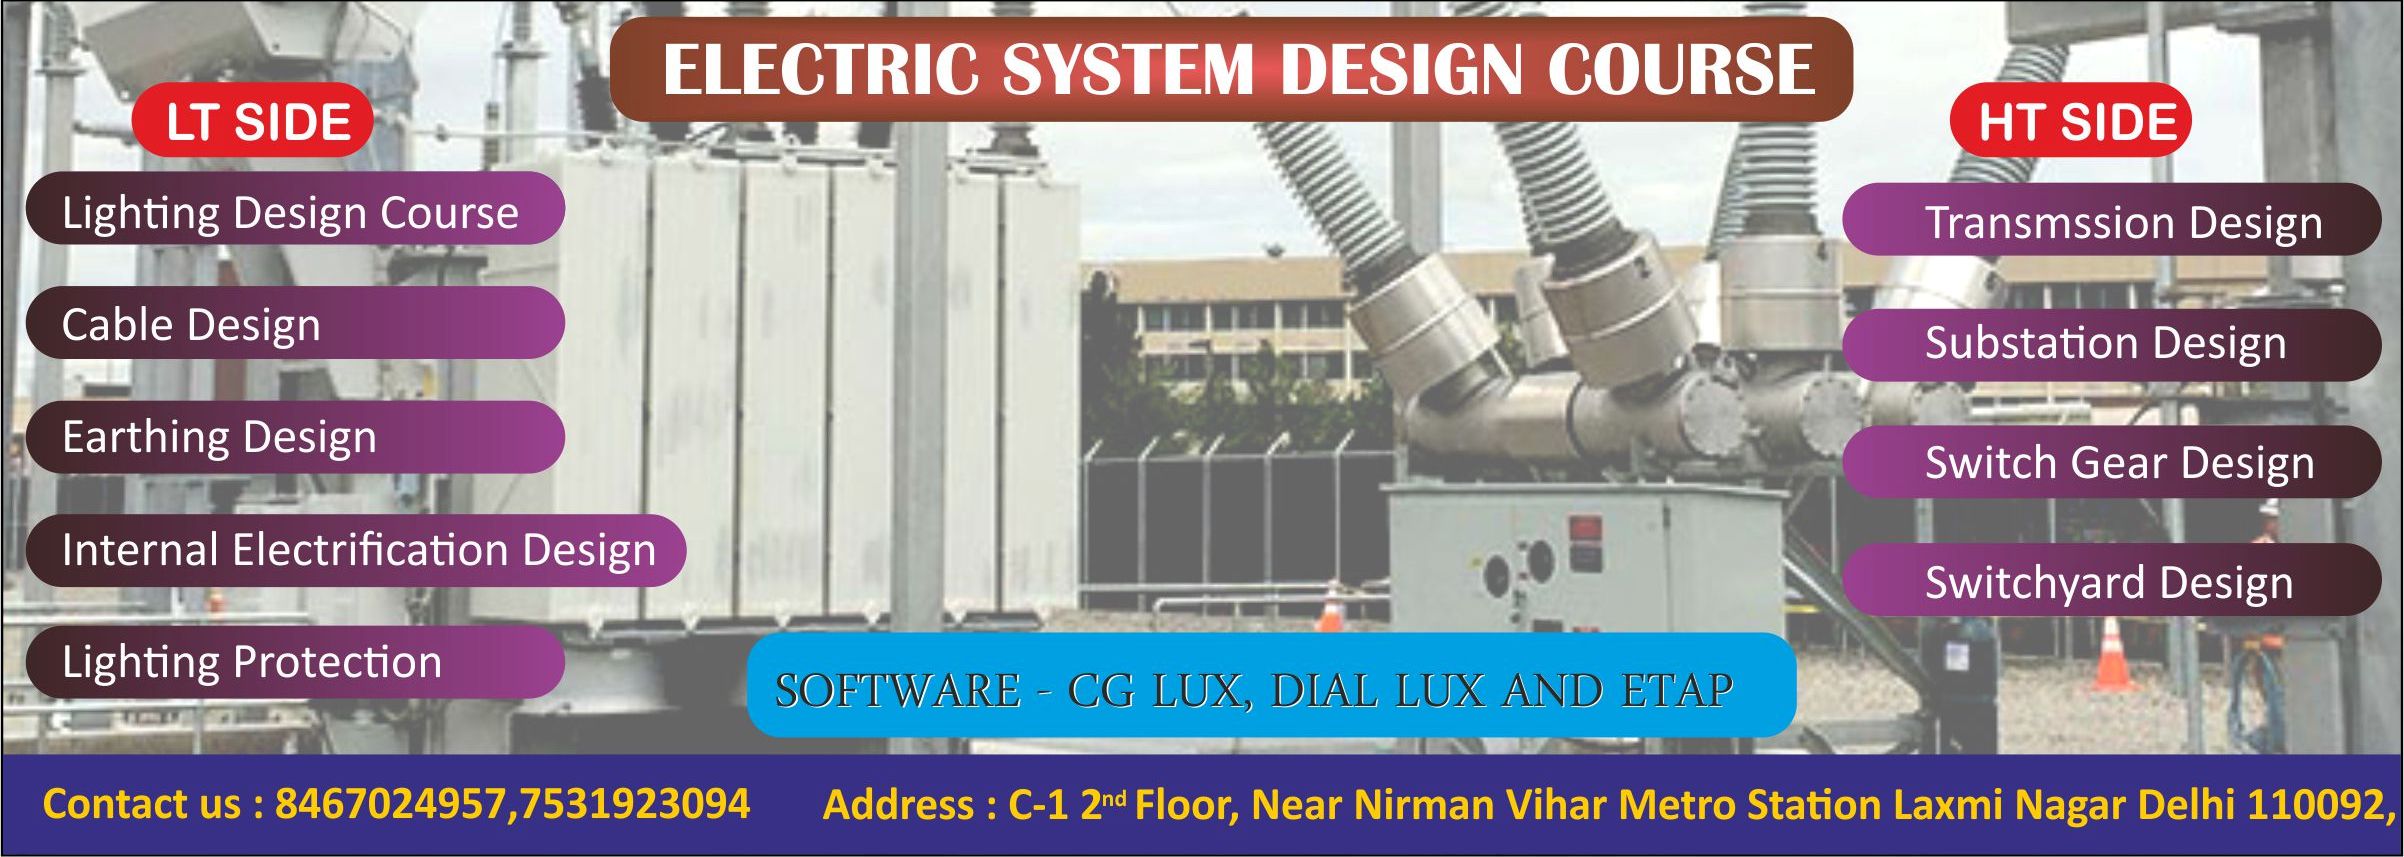 electrical system design course in delhi, electrical system design course institute, electrical system design course institute in laxmi nagar, electrical system design training course, institute for electrical system design course, training course institute for electrical system design, electrical system design course in laxmi nagar